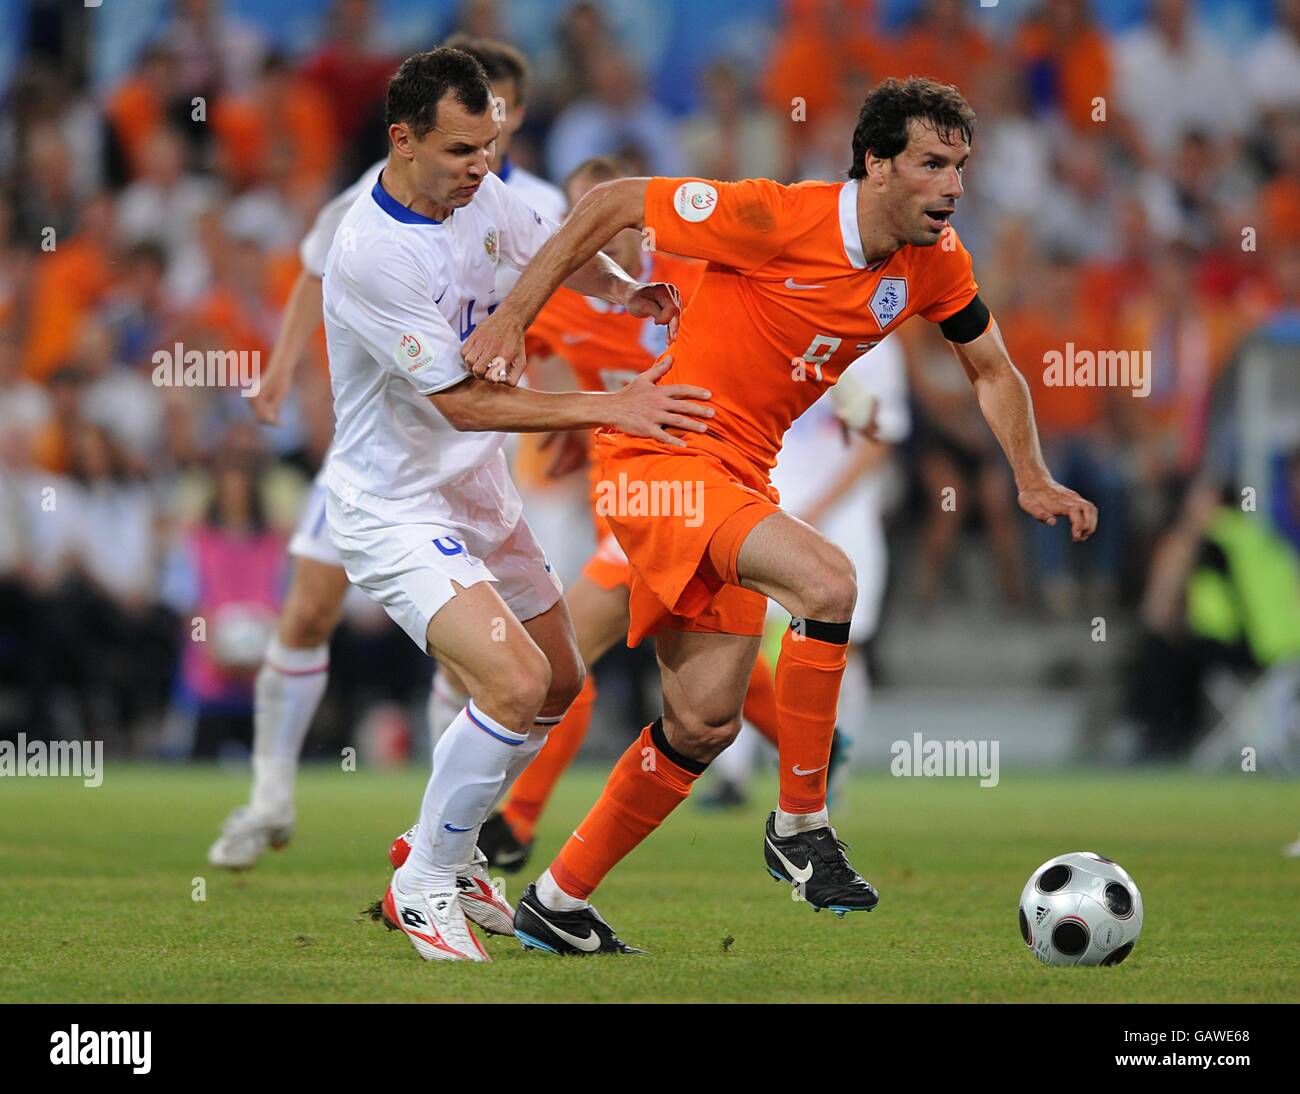 Soccer - UEFA European Championship 2008 - Quarter Final - Holland v Russia - St Jakob-Park. Holland's Ruud van Nistelrooy (right) and Russia's Sergei Ignashevich battle for the ball. Stock Photo